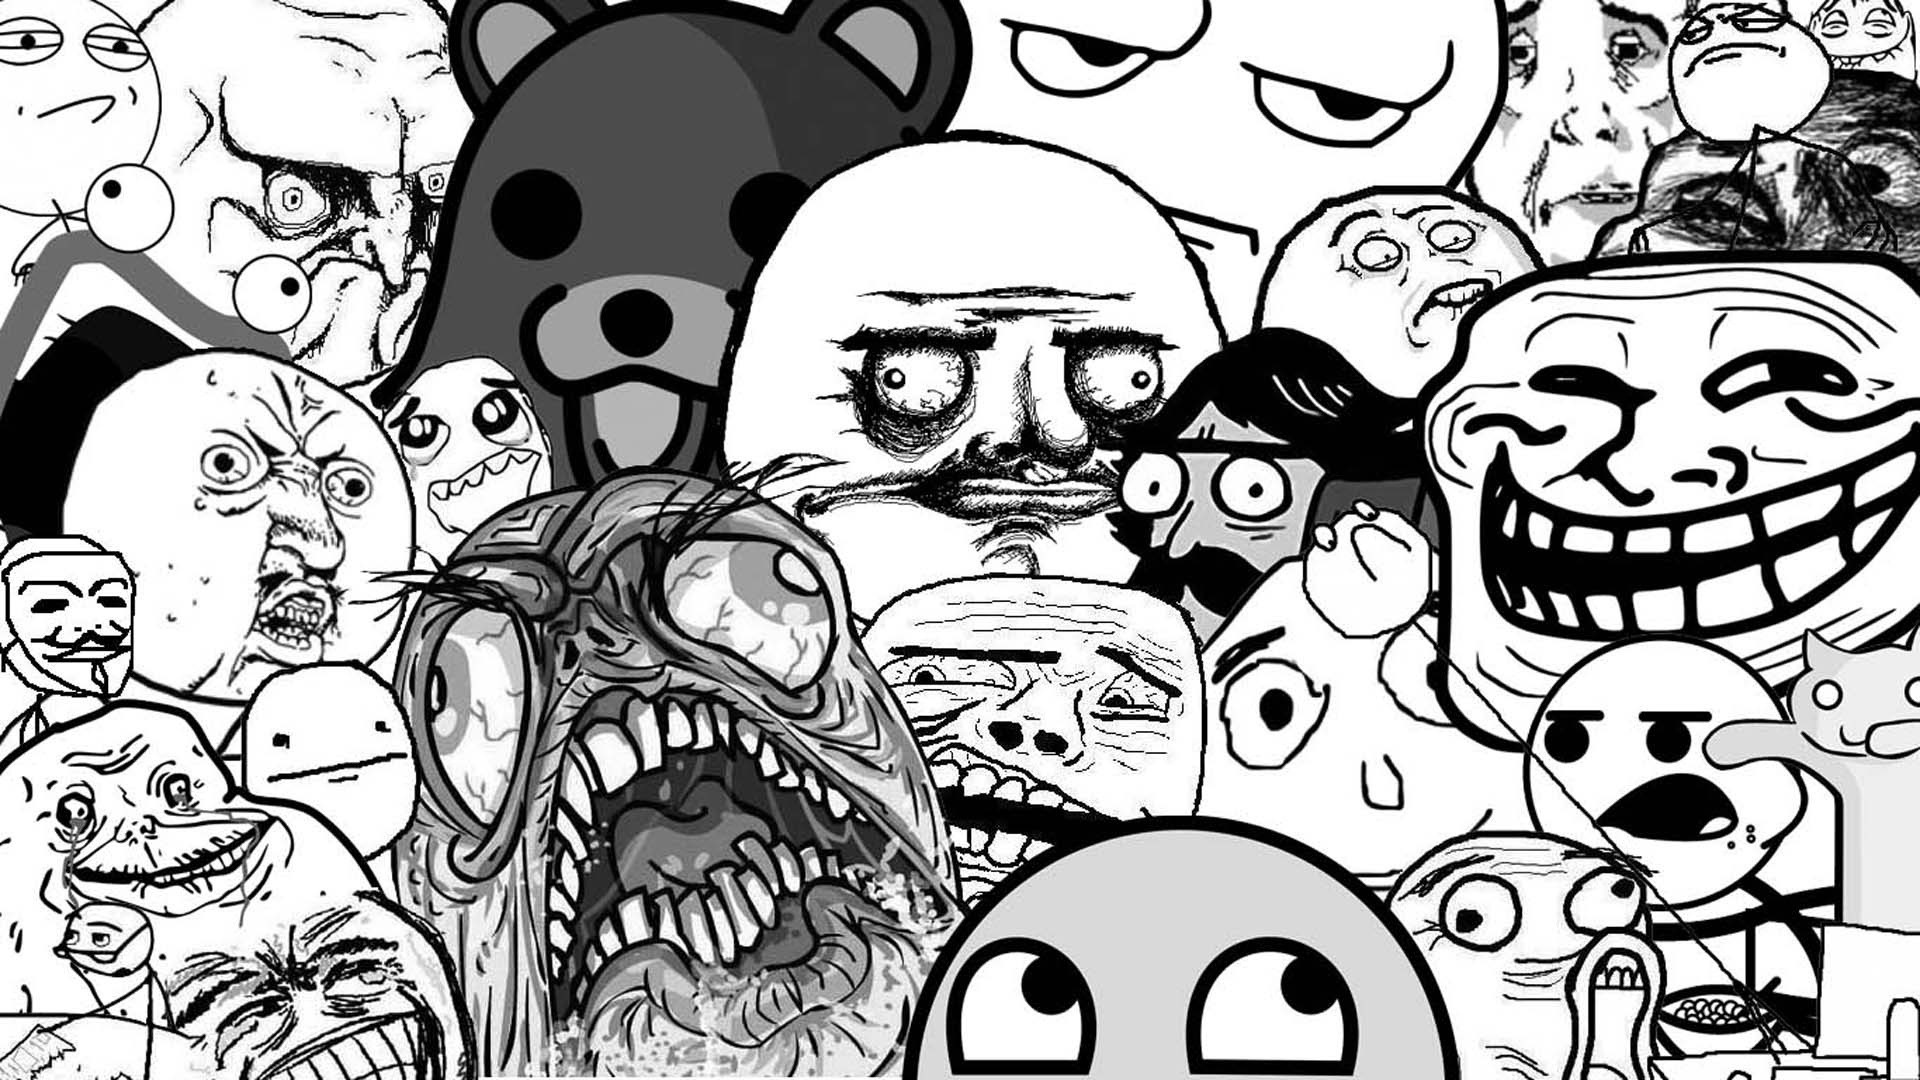 1920x1080 Awesome Face Cereal Guy Challenge Accepted Dad Fap Forever Alone Funny  Longcat Me Gusta Meme Memes No Okay Origin Pedobear Poker Rageface  Seriously Troll ...